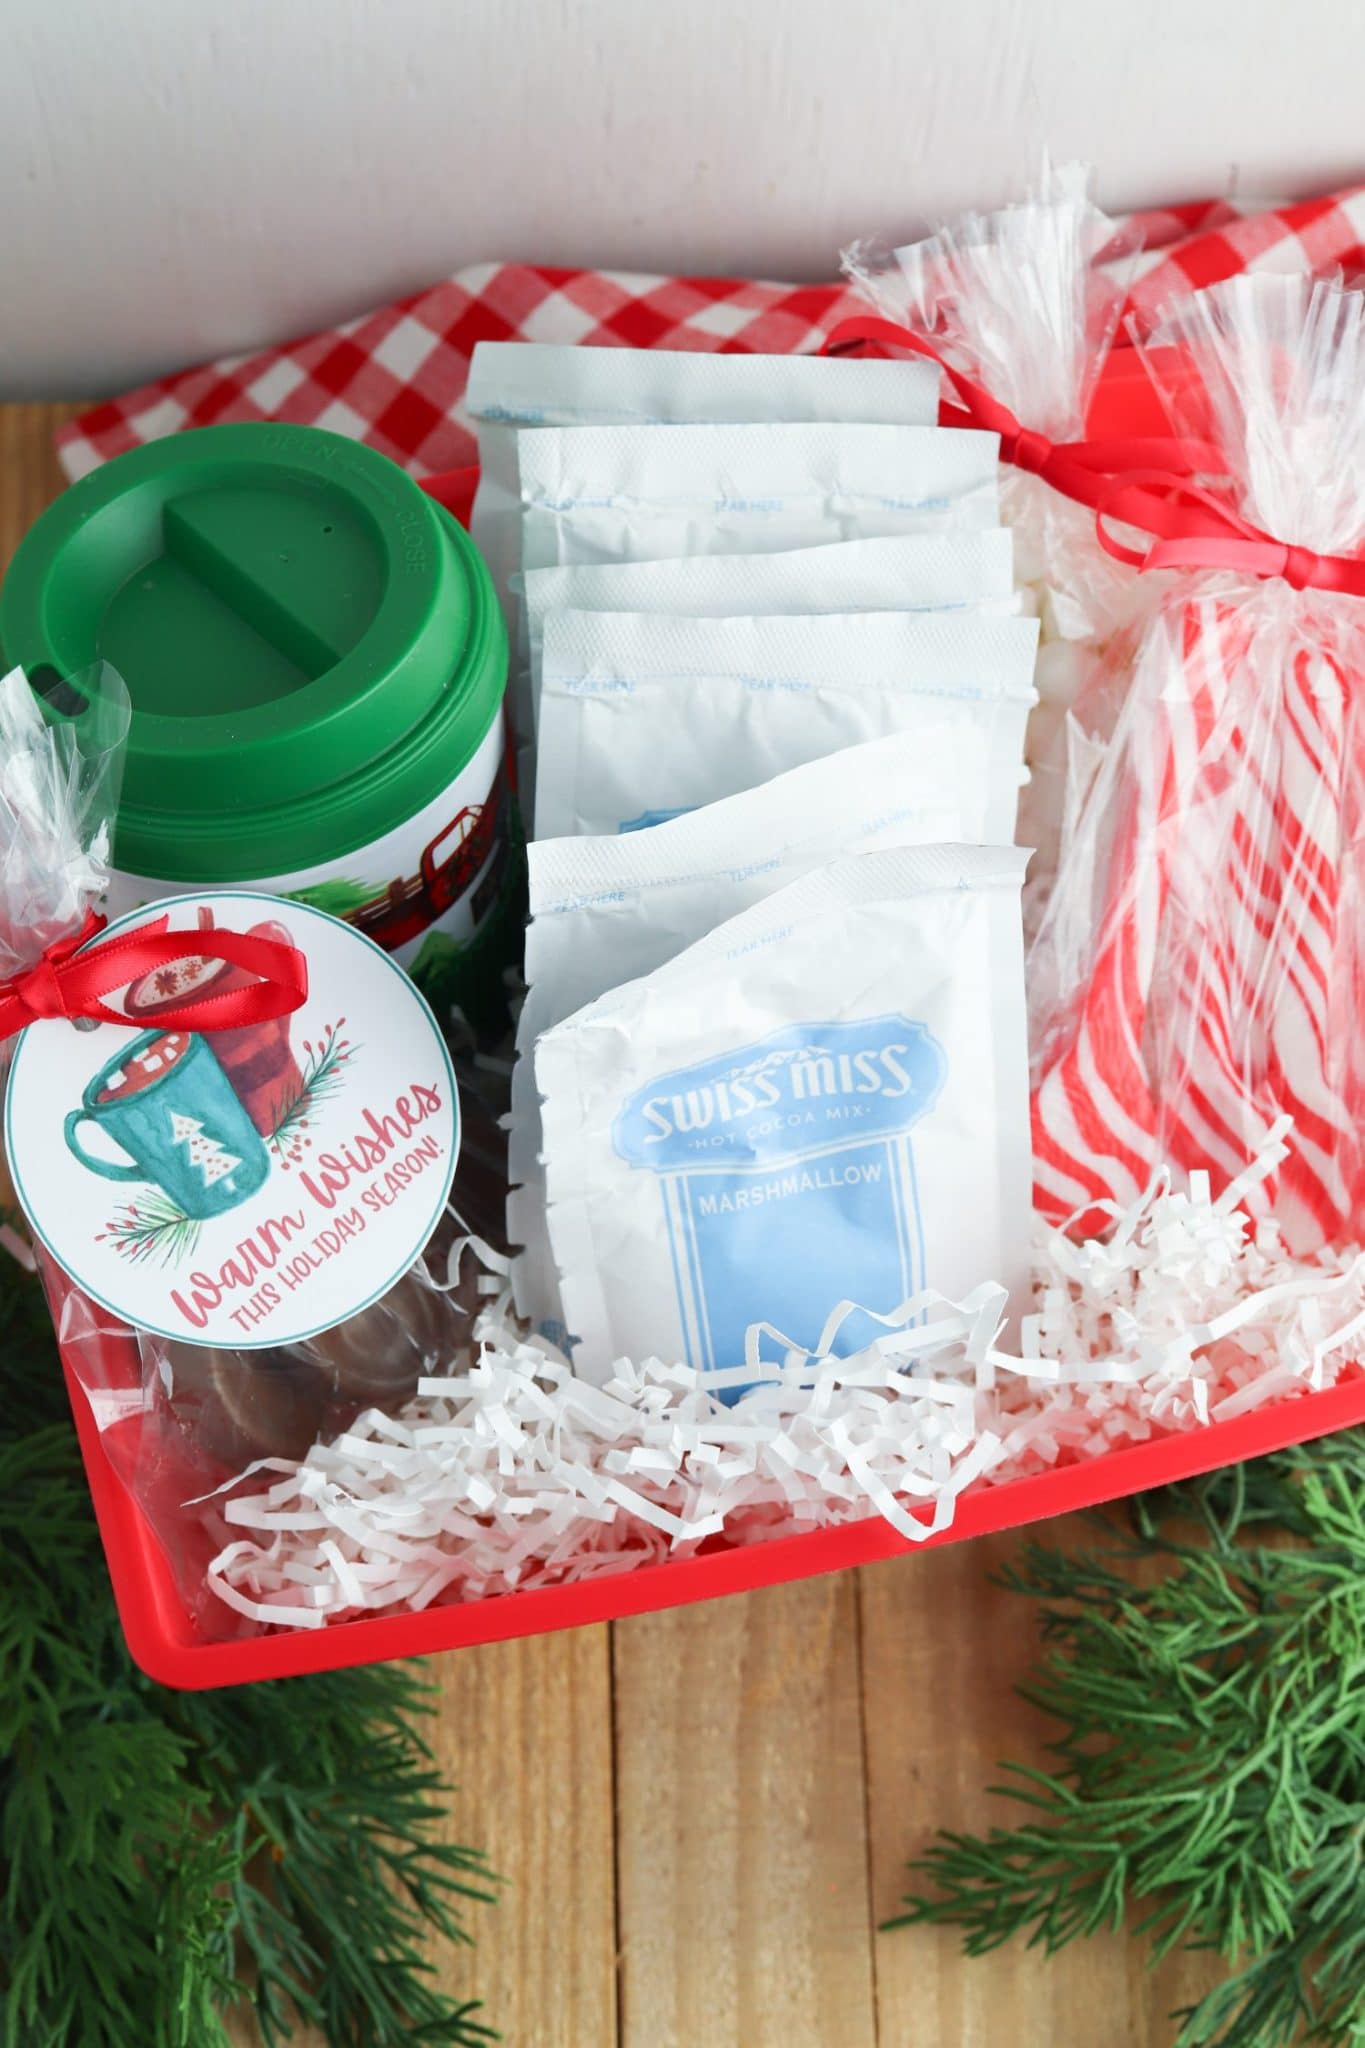 30+ Fun & Simple Christmas Gifts for Neighbors This Year